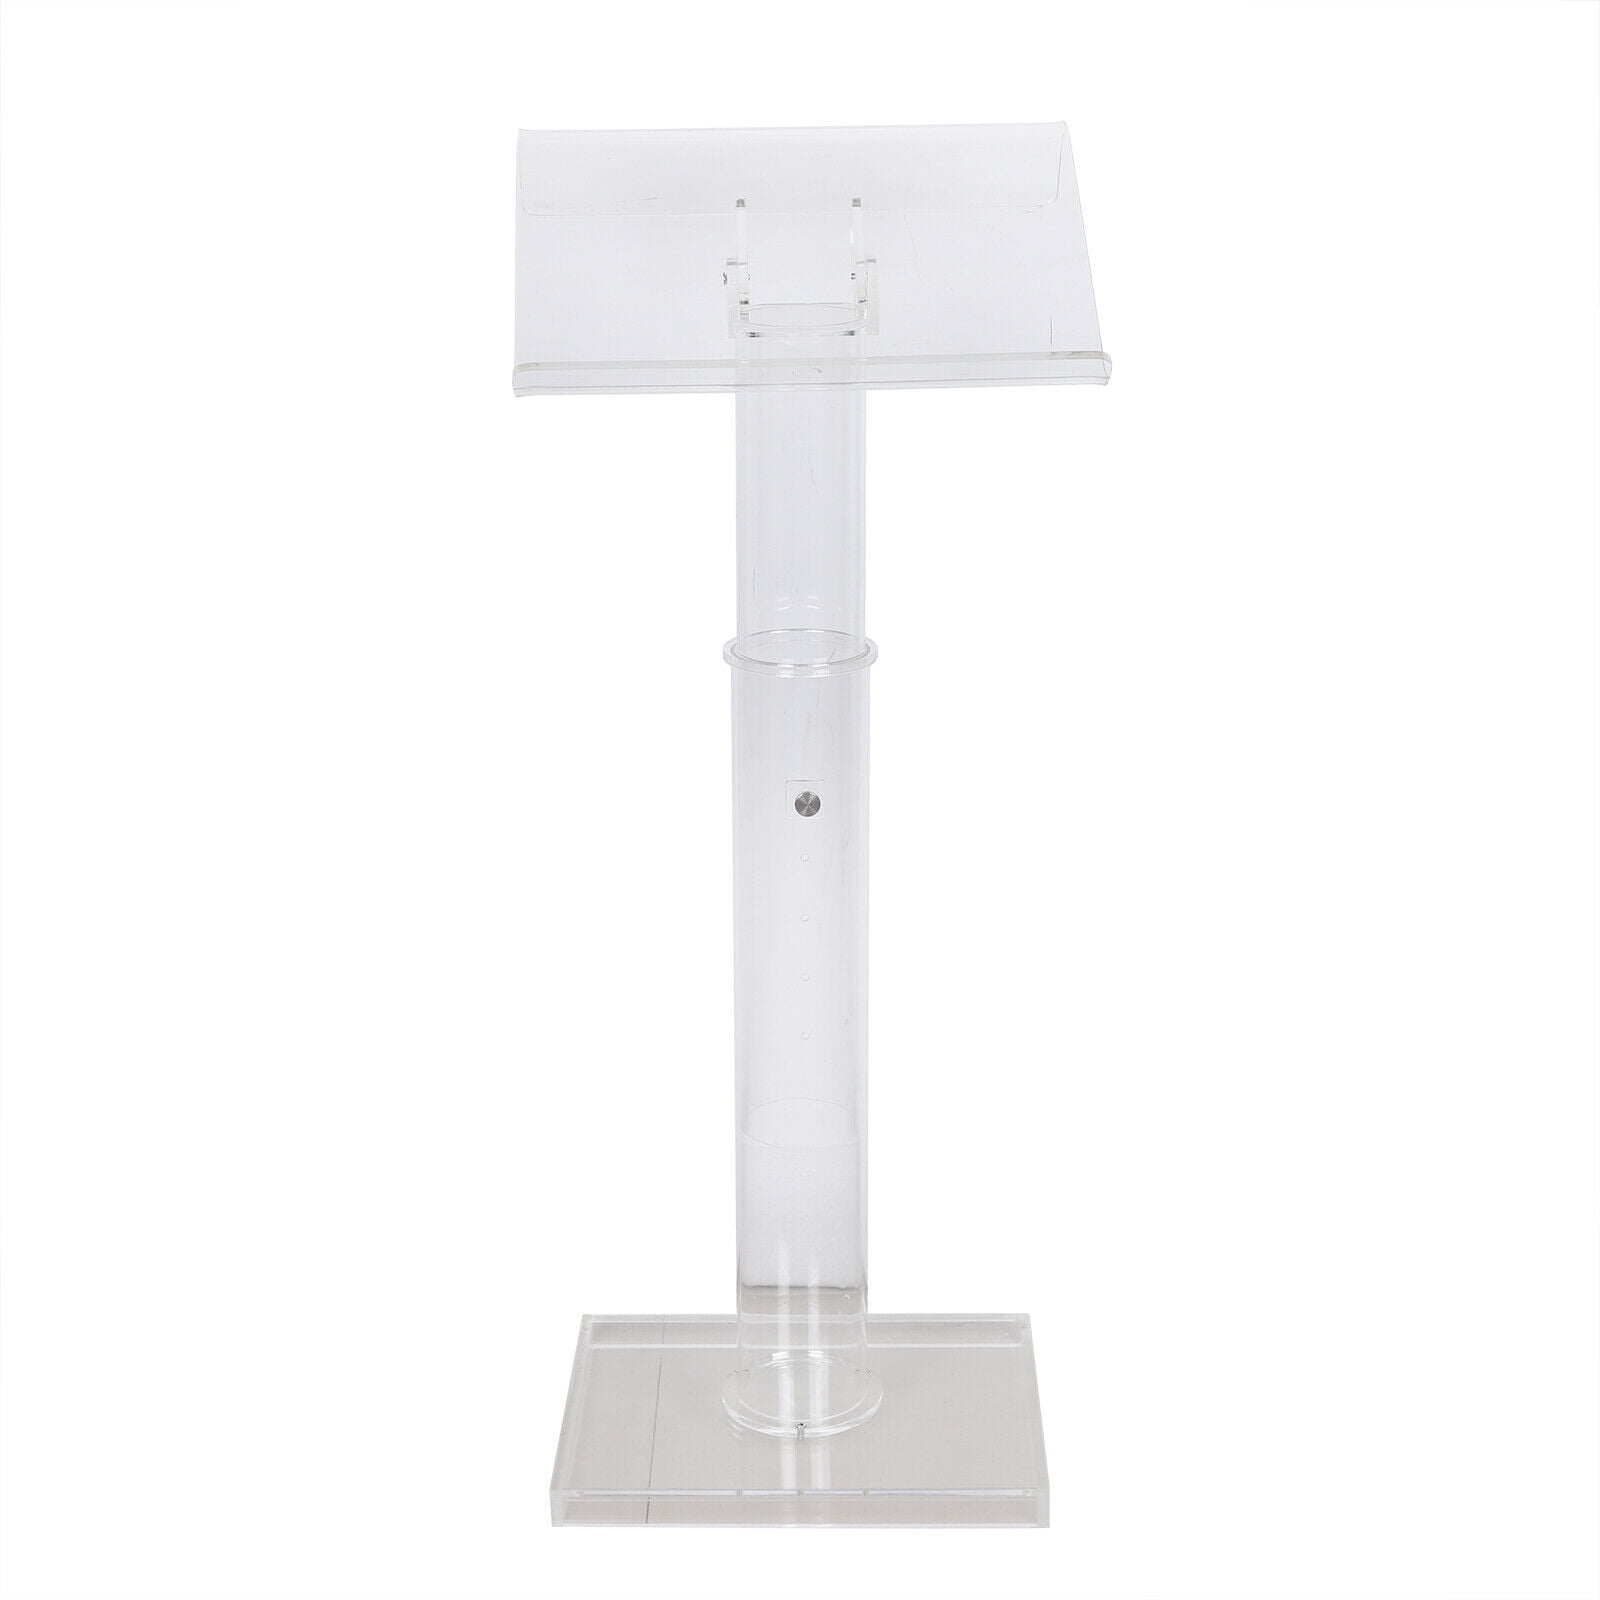 Clear Podium Stand Acrylic Pulpit Professional Portable Presentation Podium Plexiglass Pulpit Lectern for School Church Height Adjustable 31.50-51.18'' 